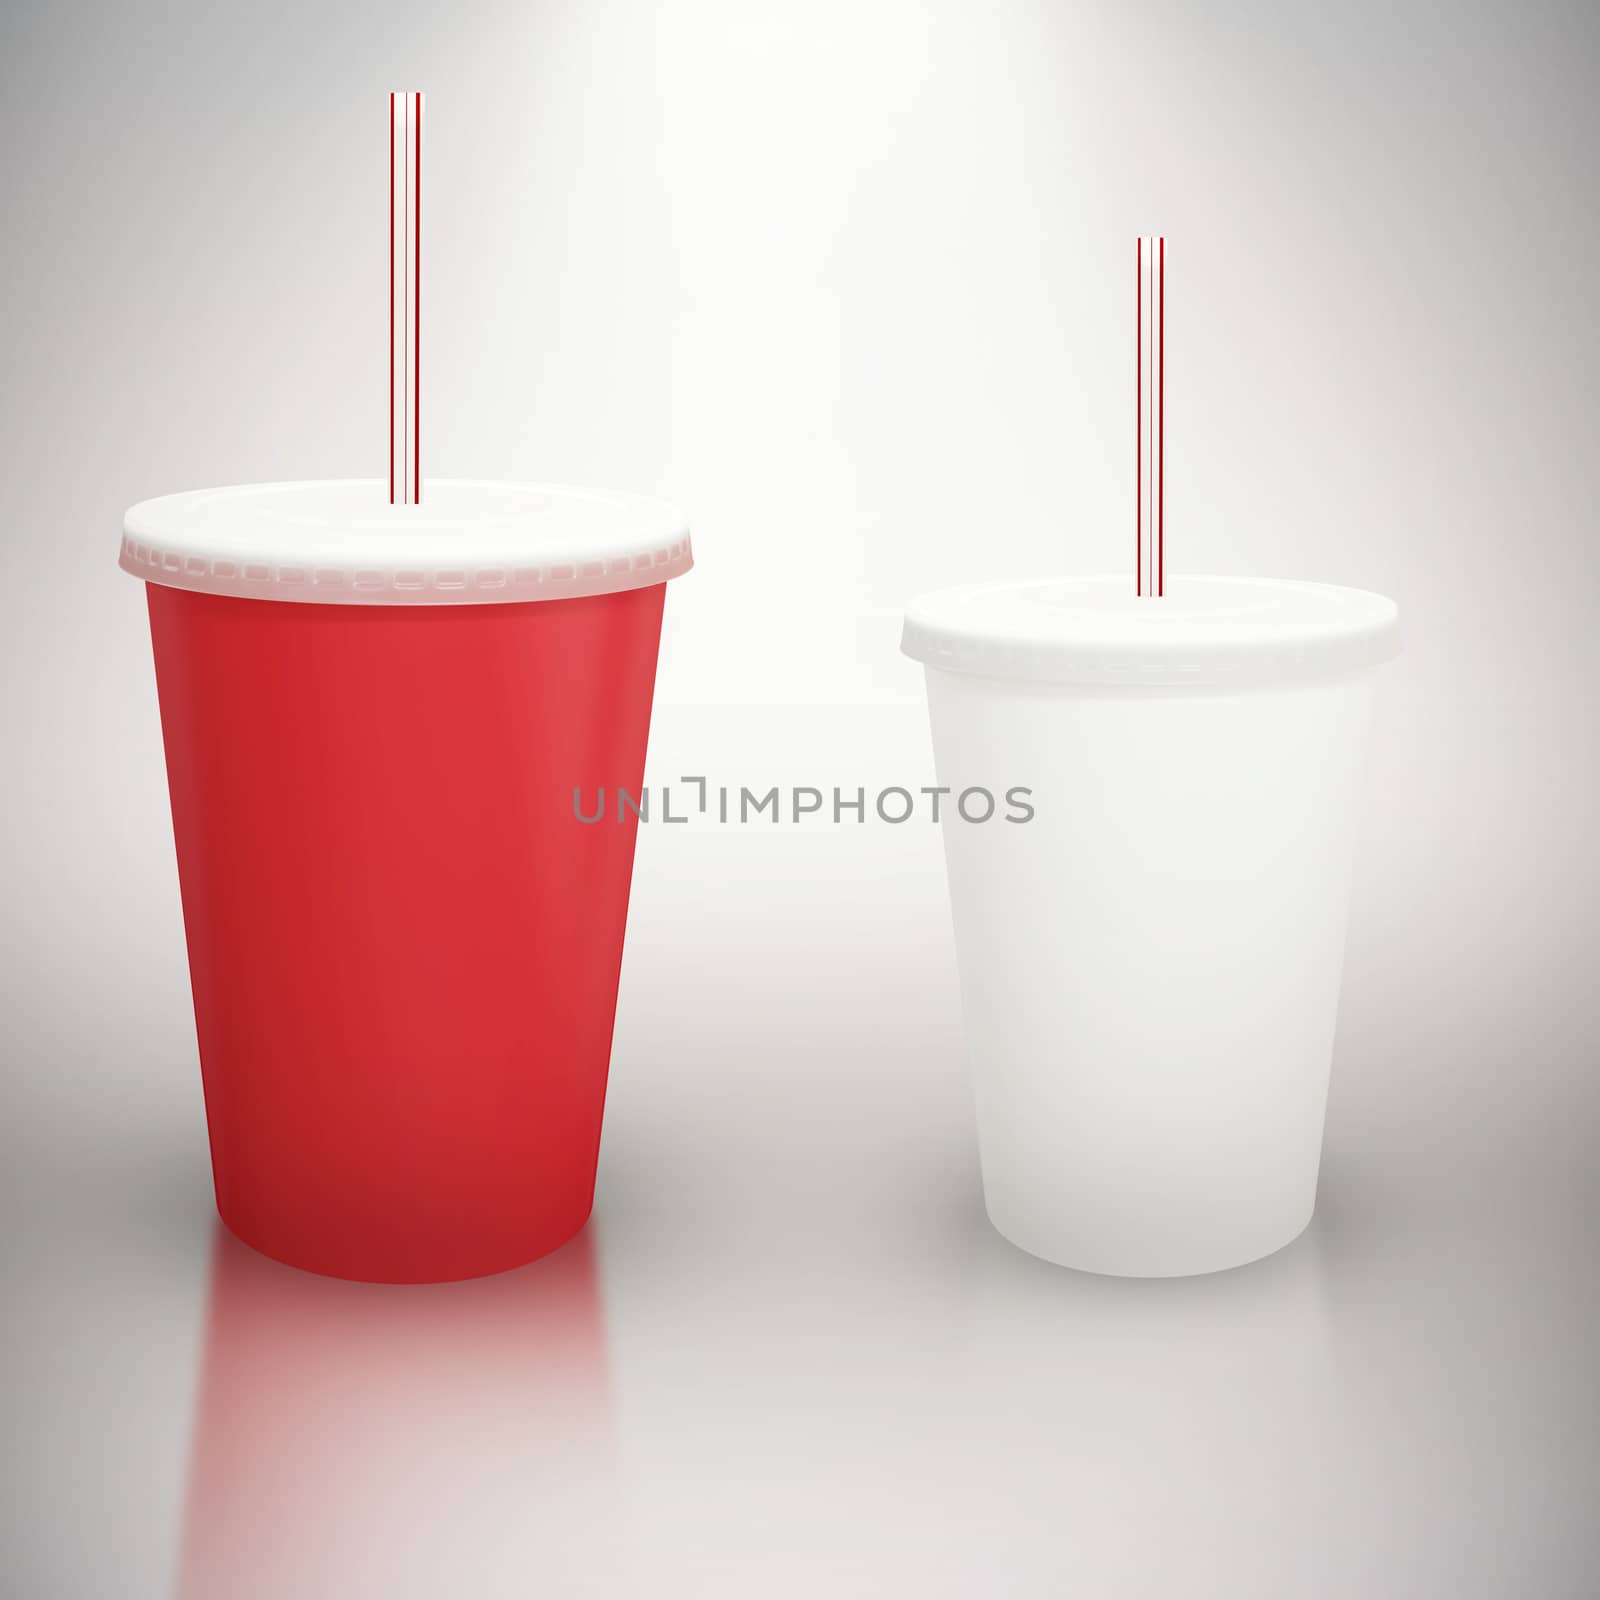 Red cup over white background against grey background